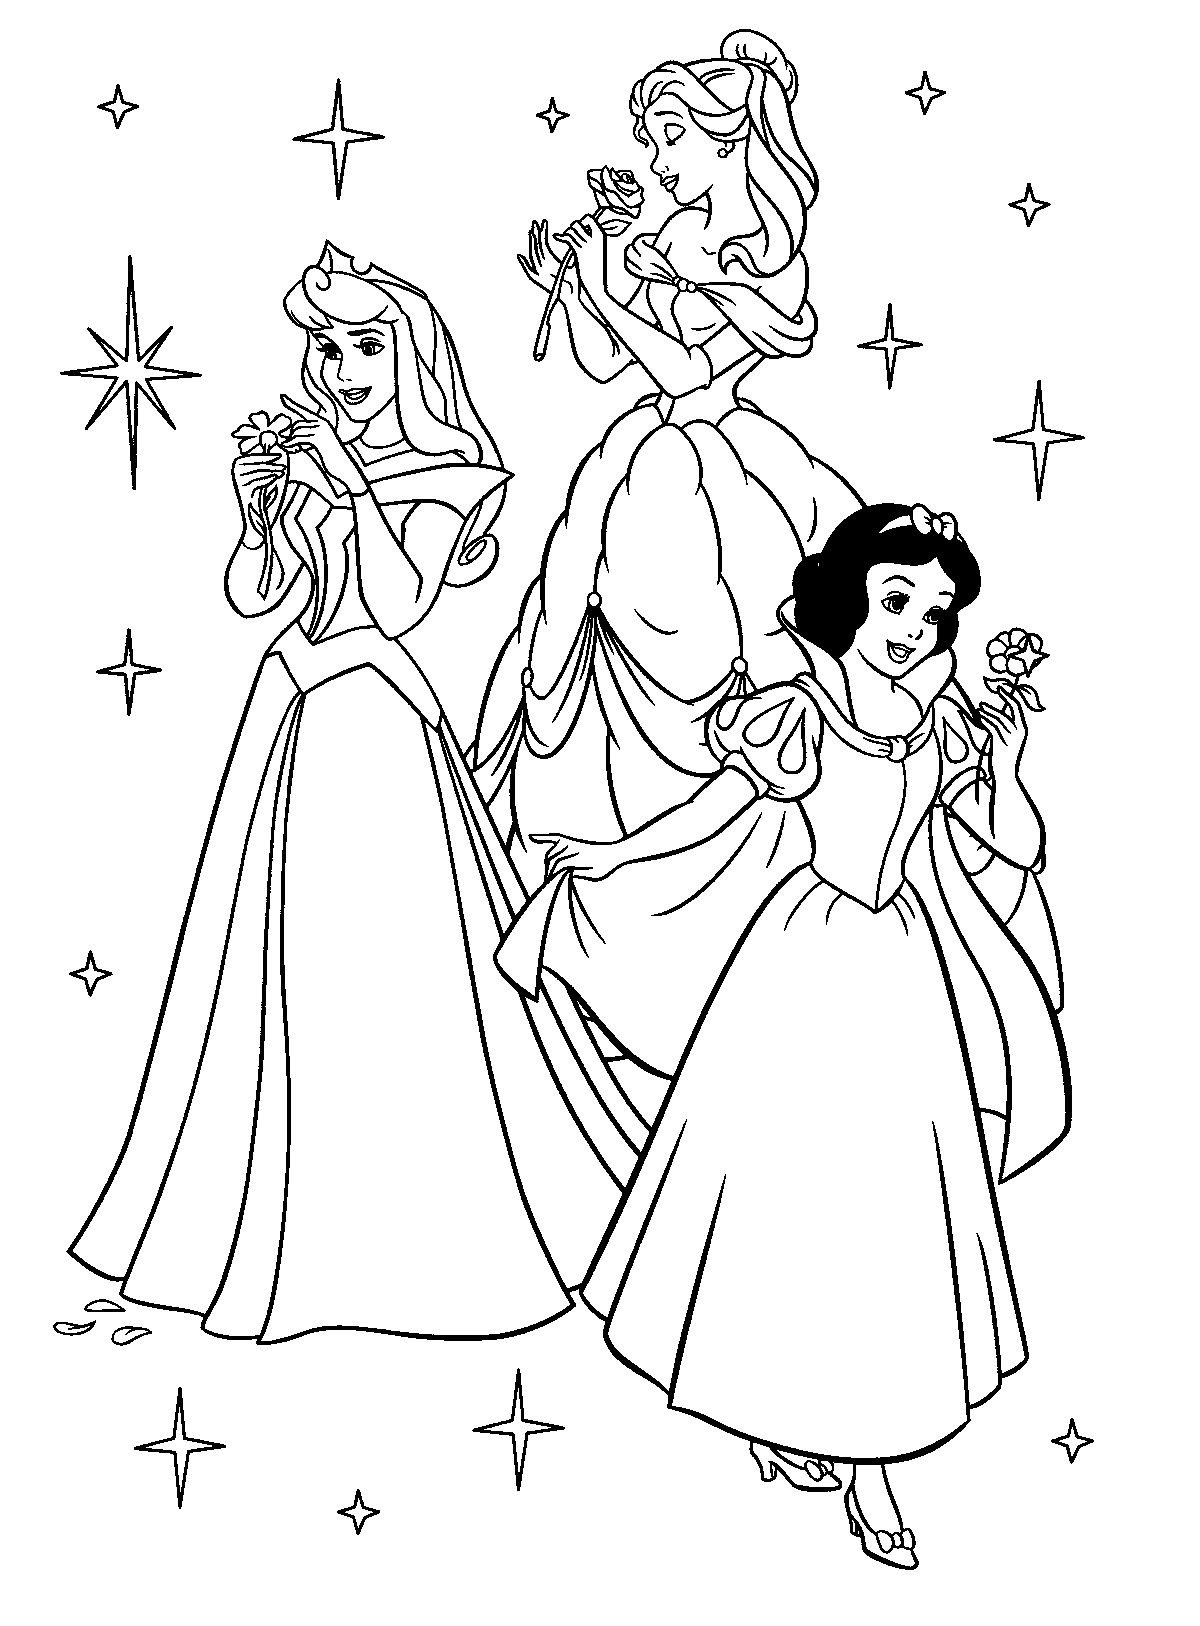 Free Printable Disney Princess Coloring Pages For Kids | Színezők - Free Printable Princess Coloring Pages